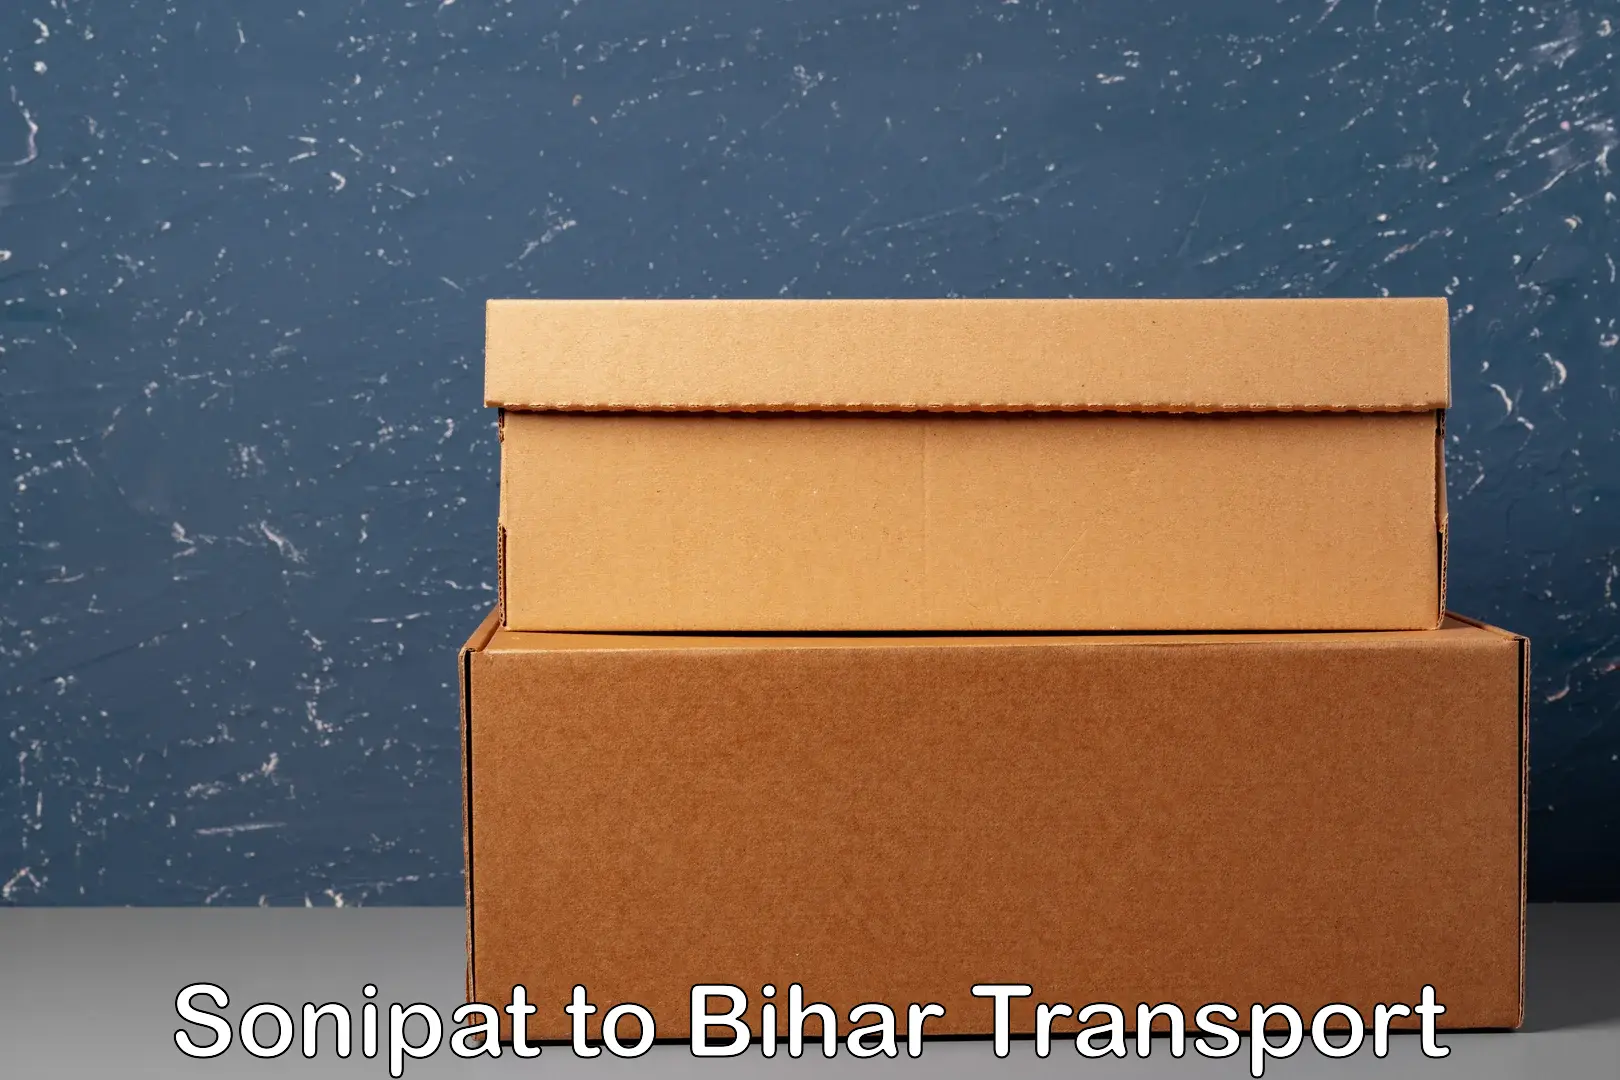 Daily parcel service transport Sonipat to Jehanabad